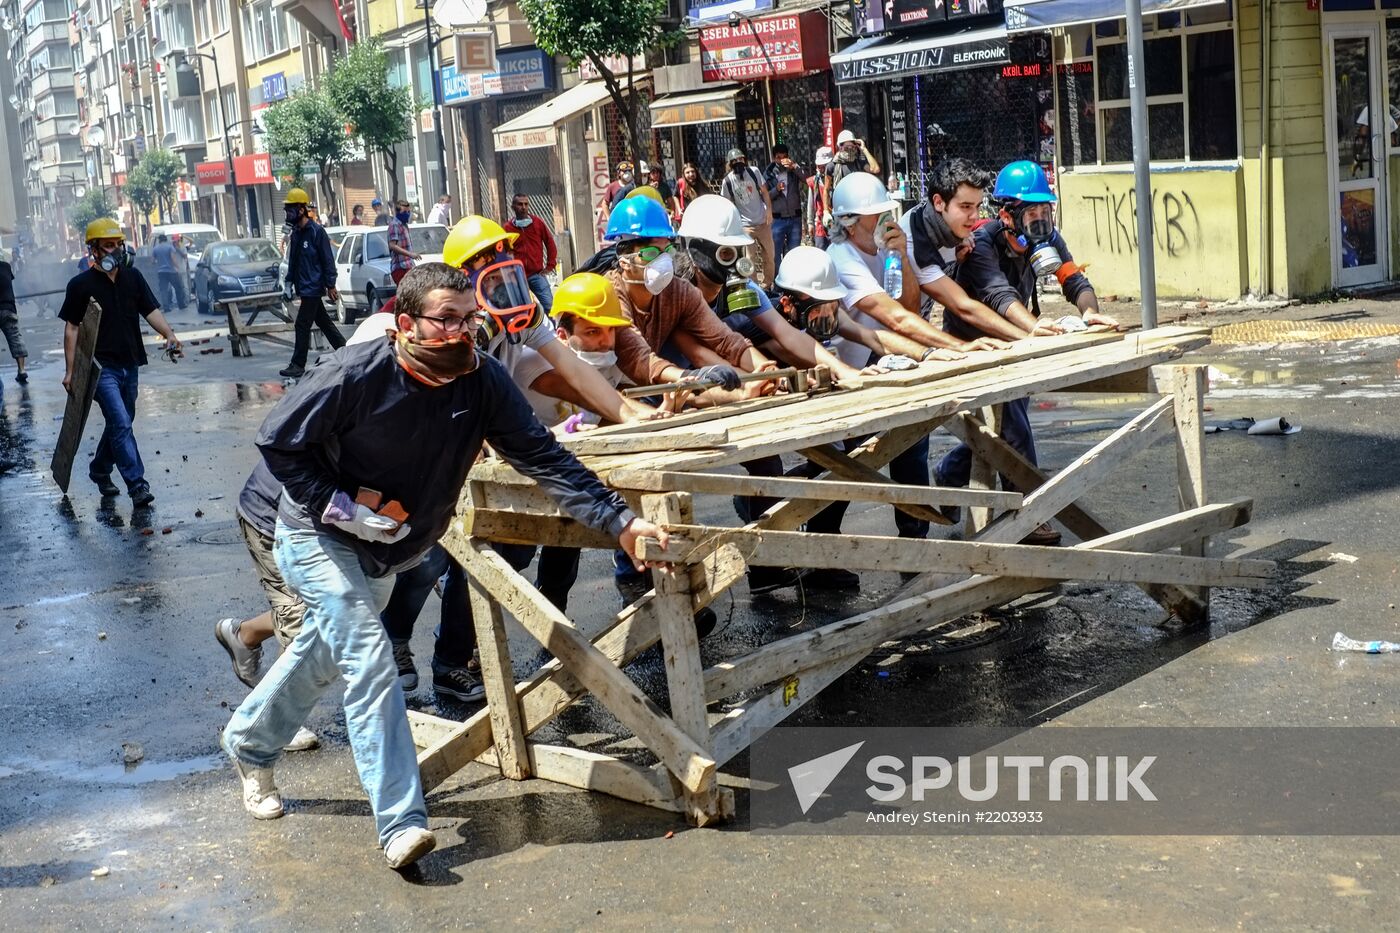 Clashes between protesters and police in Istanbul